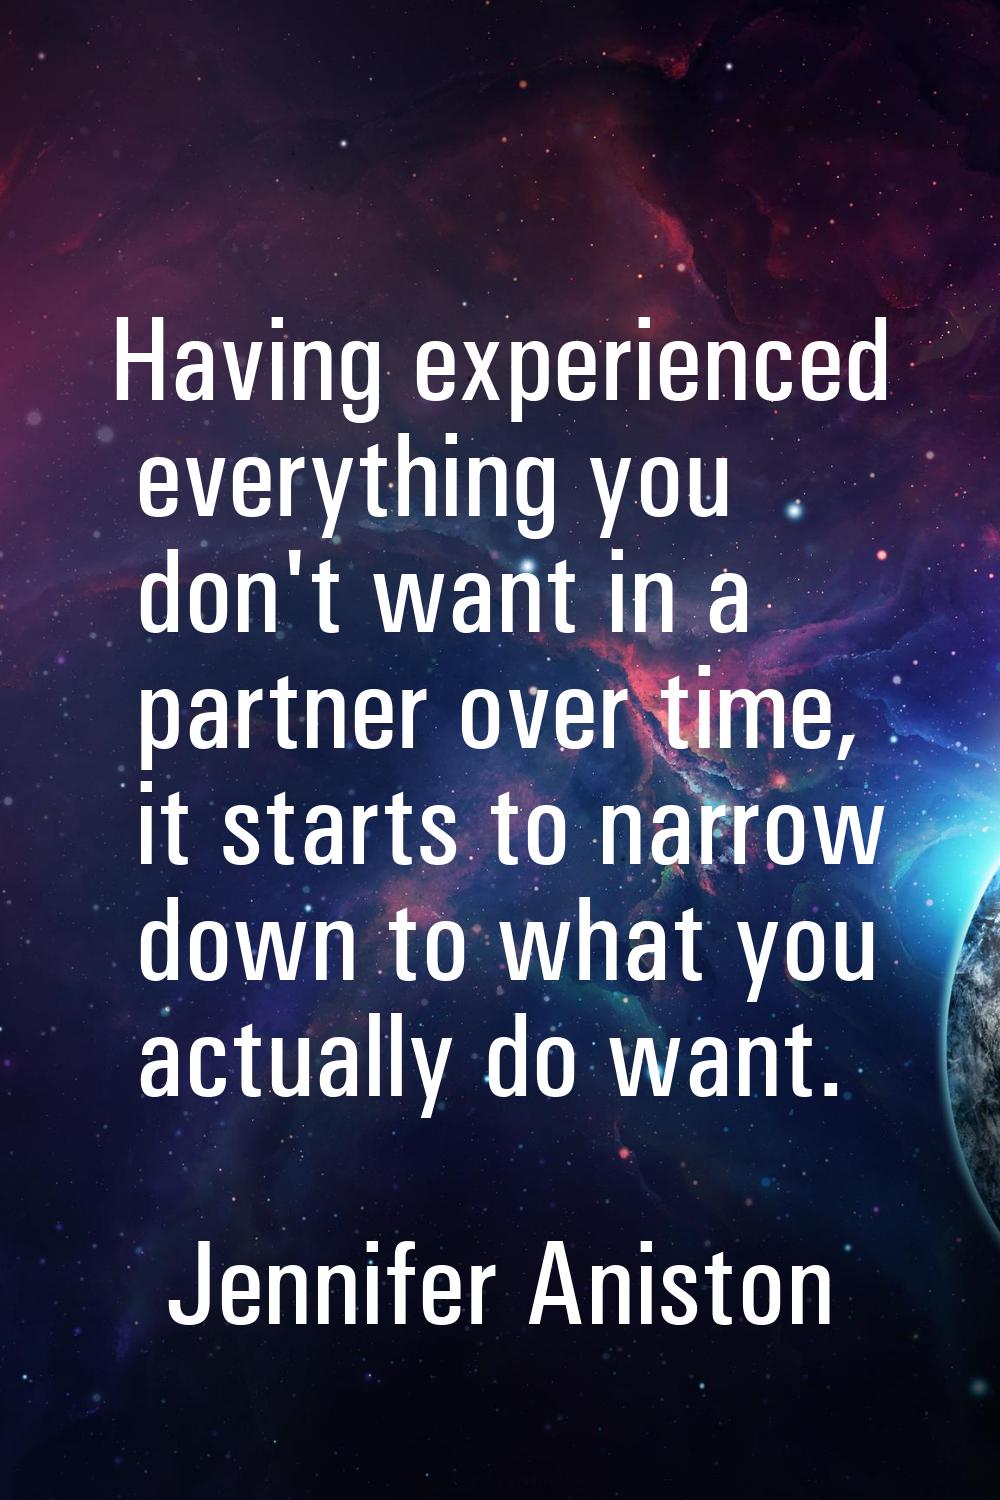 Having experienced everything you don't want in a partner over time, it starts to narrow down to wh